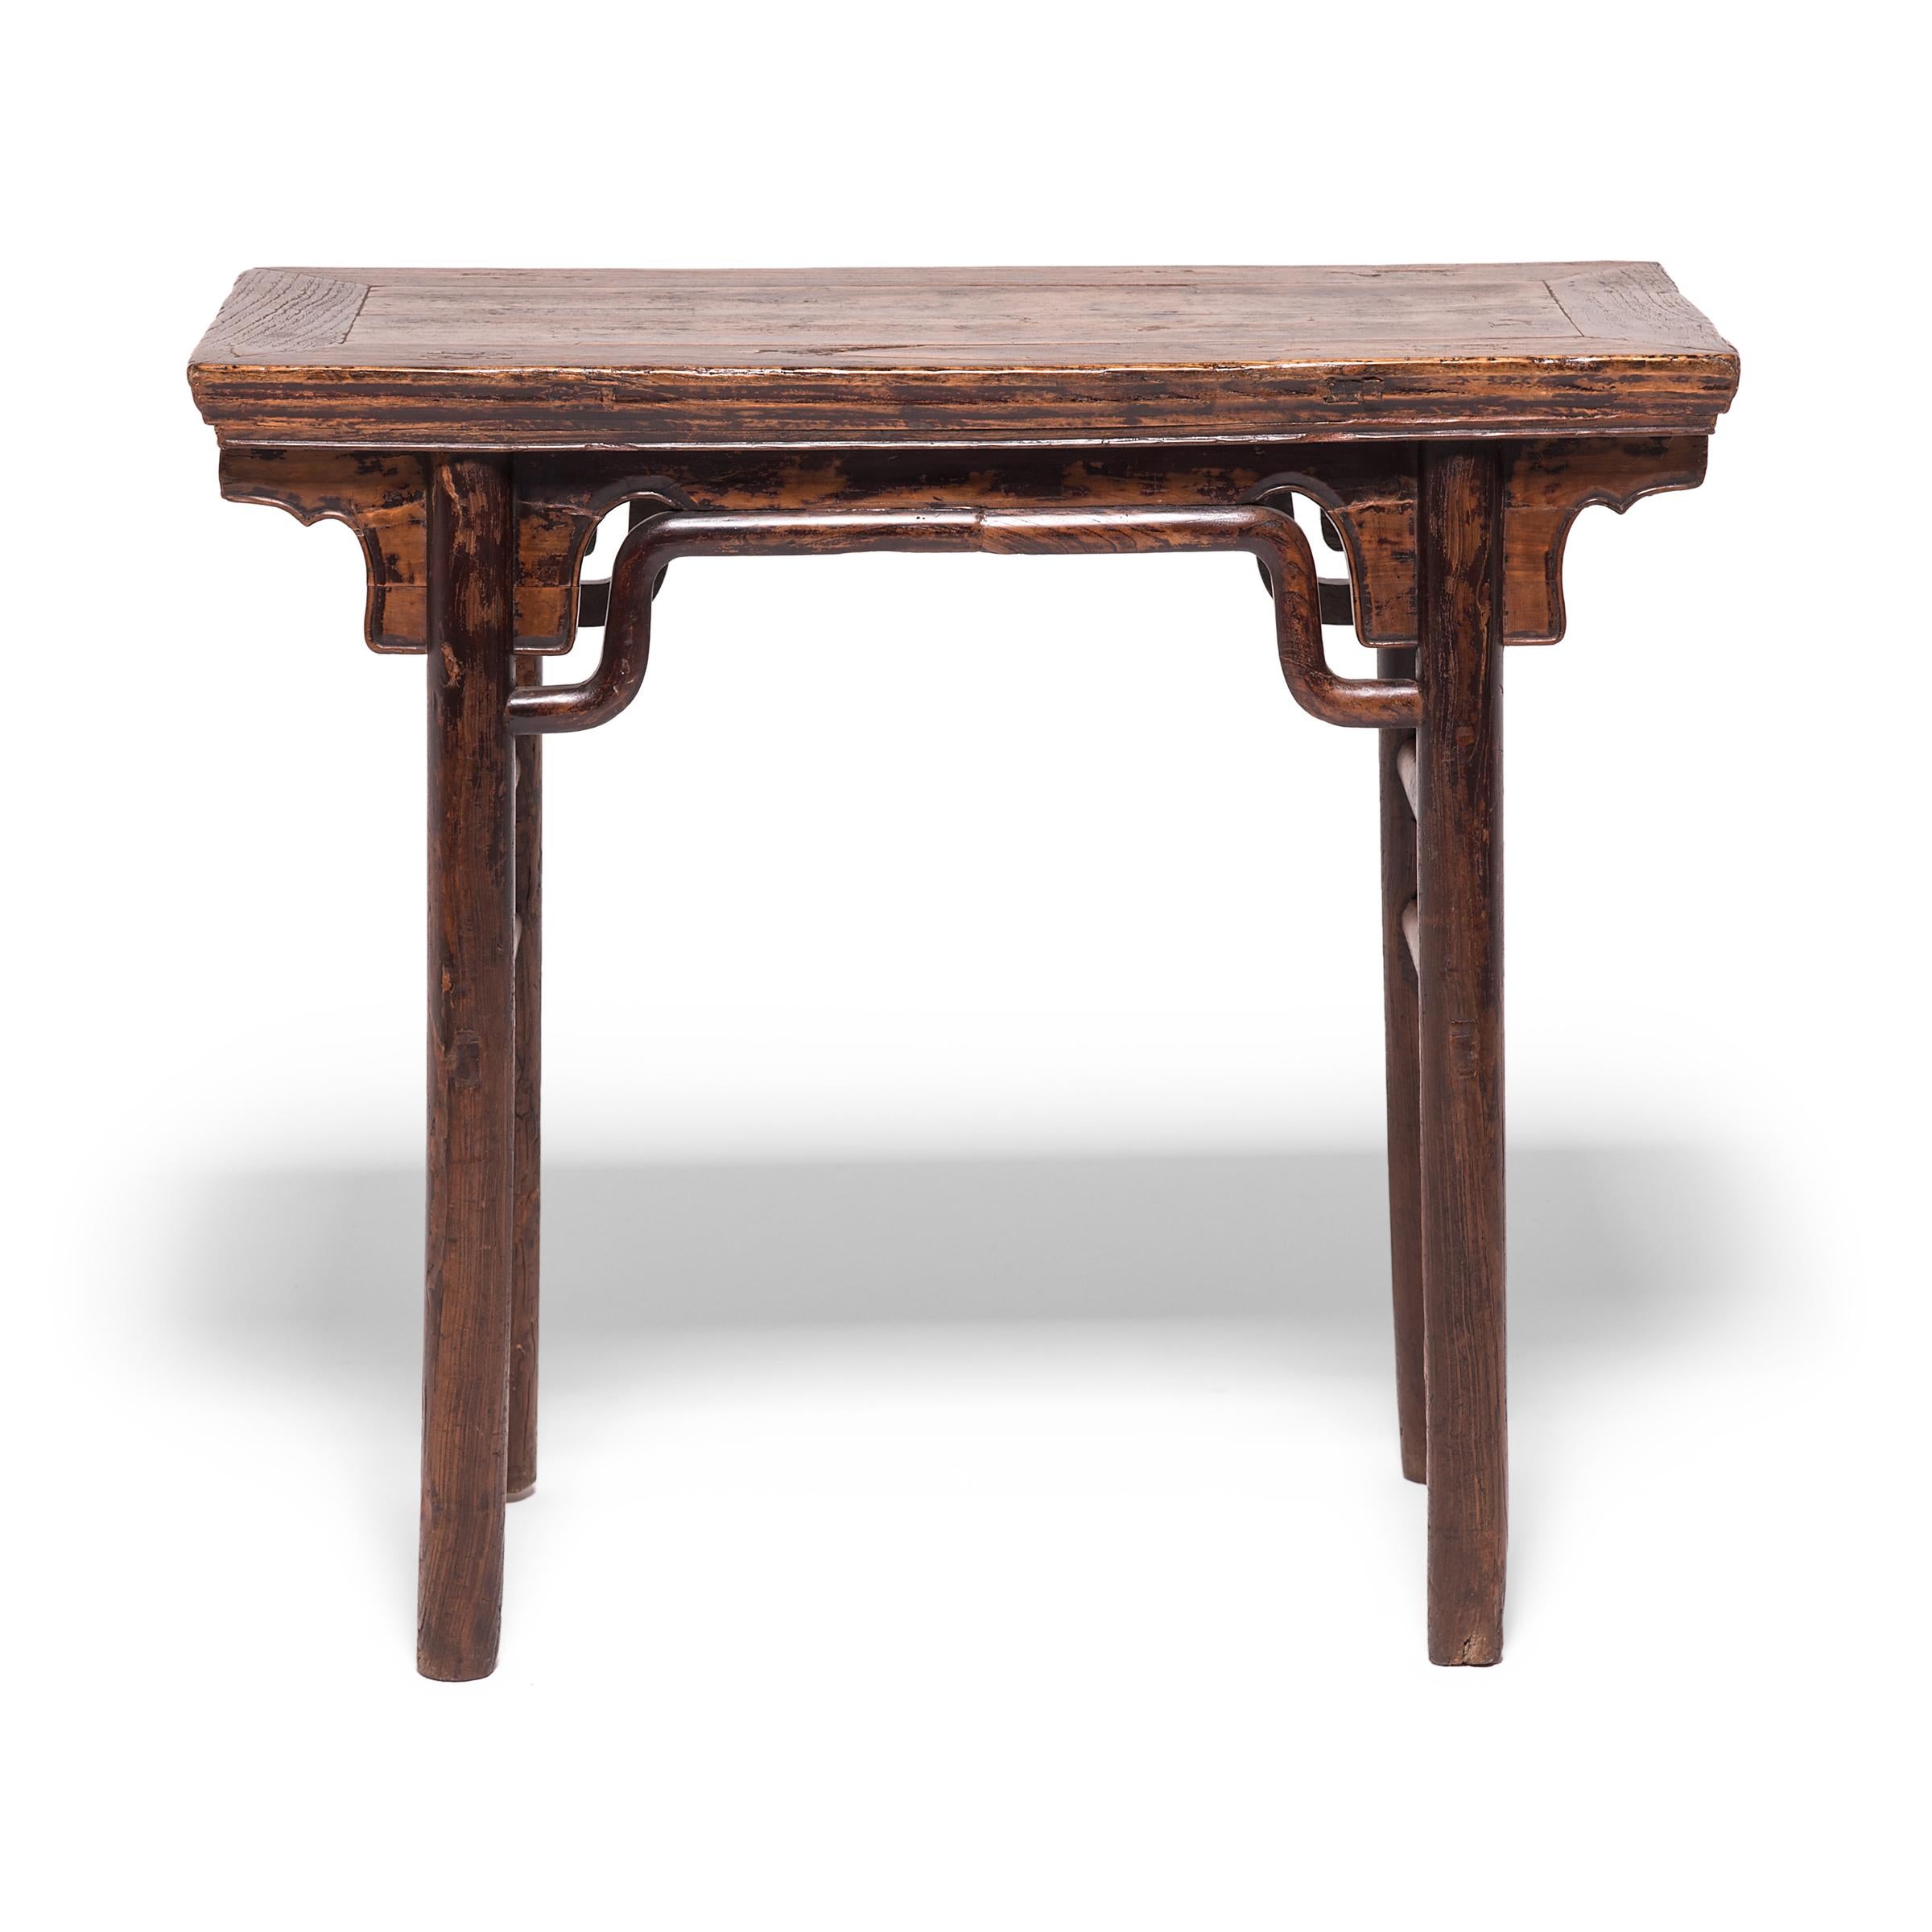 Lacquered Chinese Wine Table with Humpback Stretchers, circa 1850 For Sale